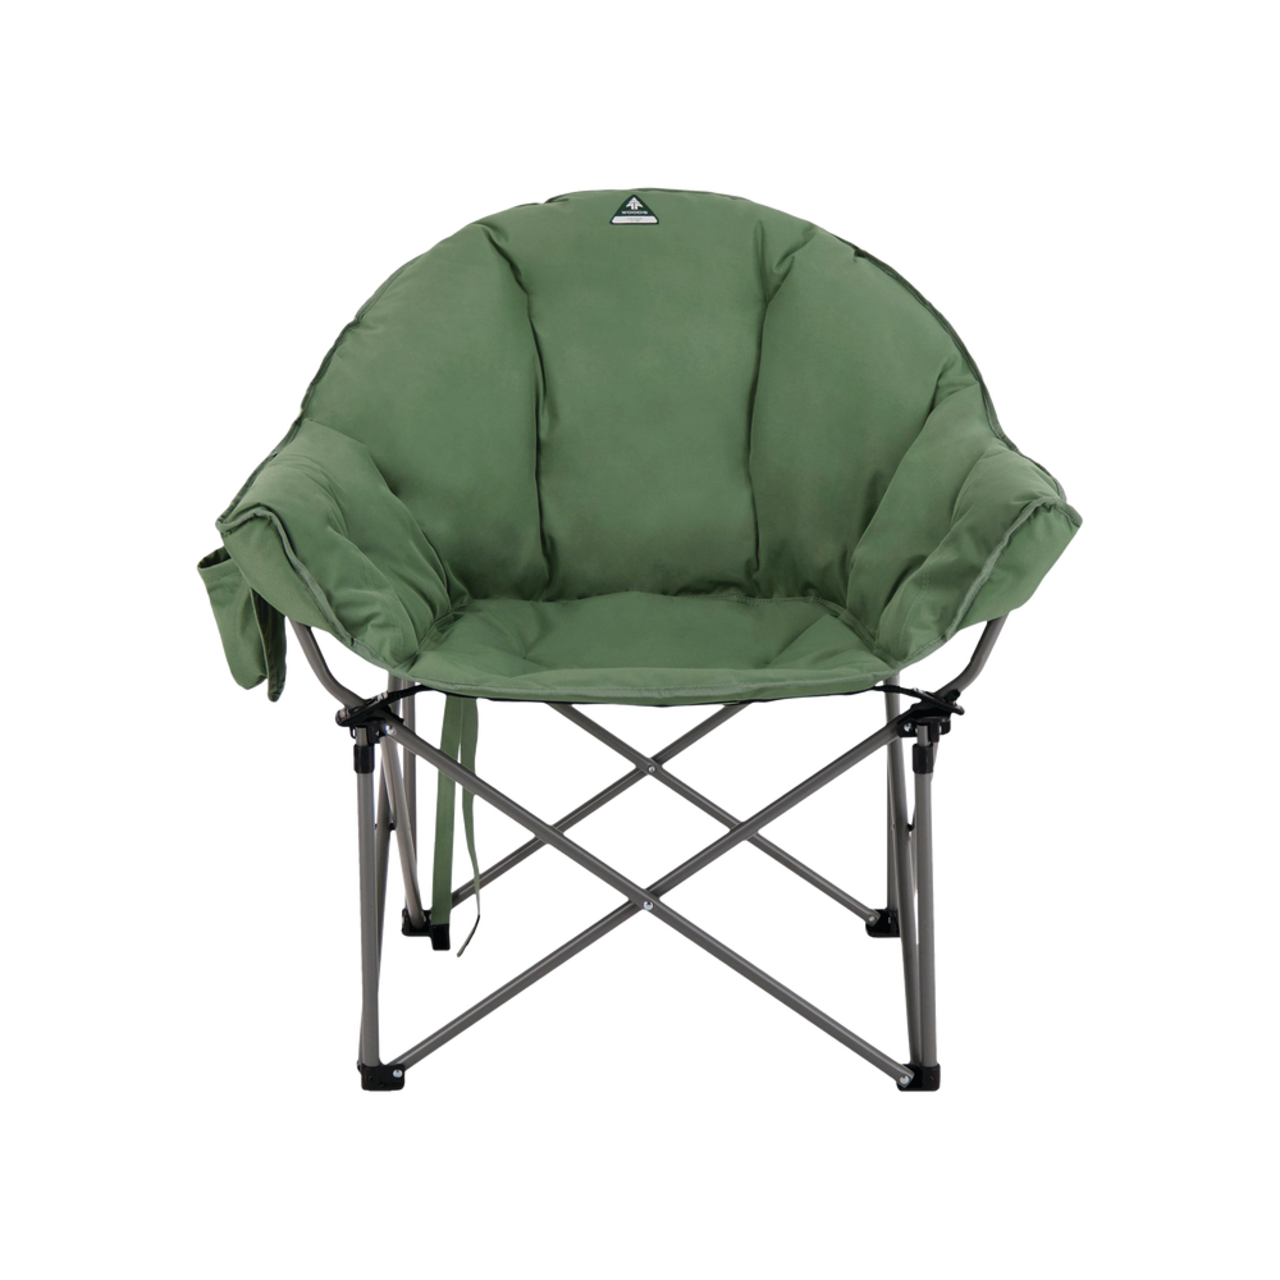 Outbound Lightweight Folding Camping Quad Chair w/ Solid Armrests & Swivel  Cup Holder